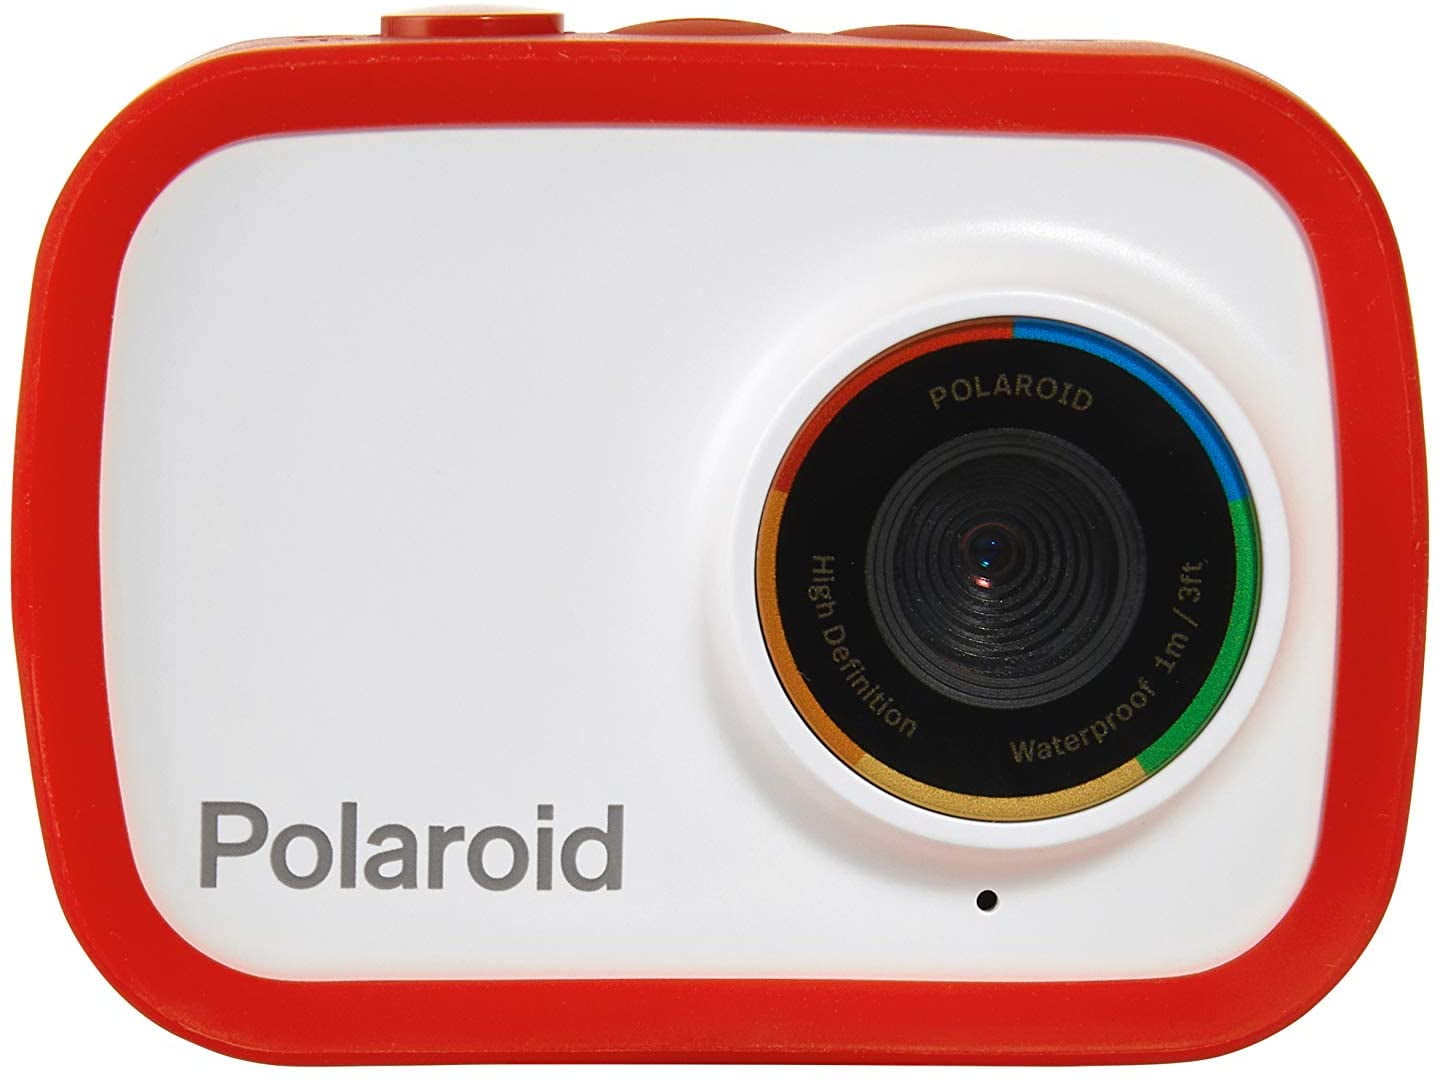 Polaroid Sport Action Camera 720p 12.1mp, Waterproof, Rechargeable Battery, Mounting Accessories